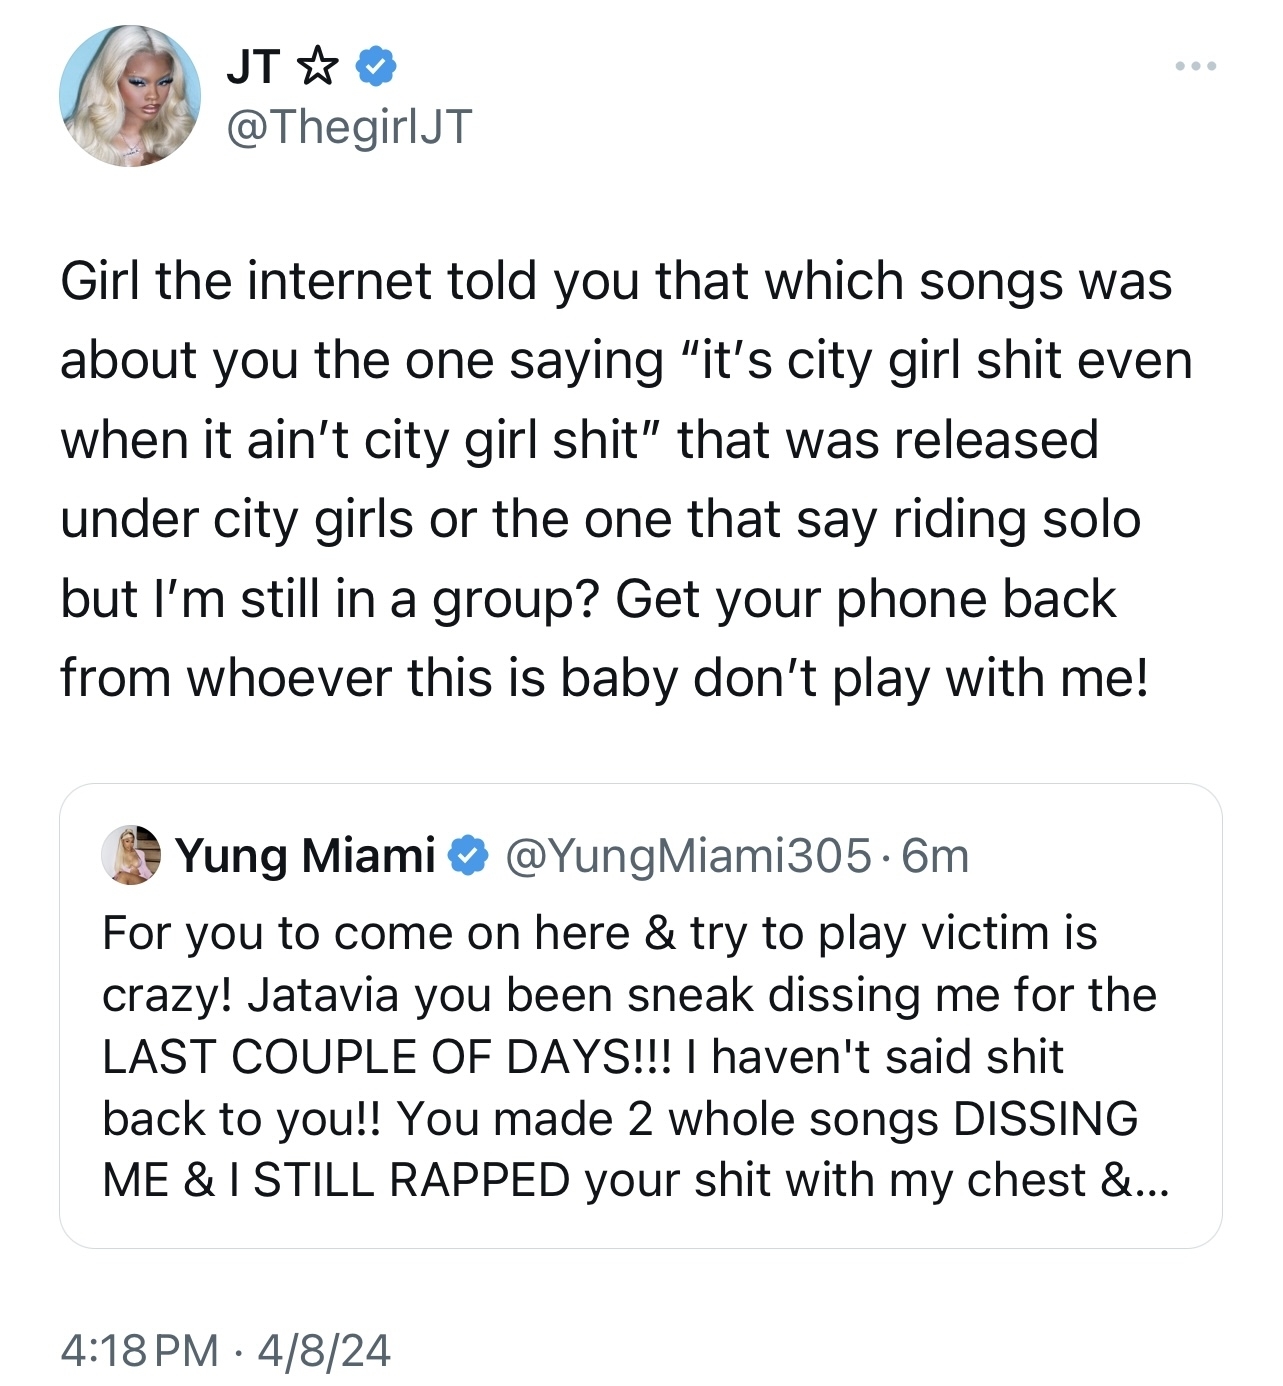 Two tweets discussing a disagreement between rappers JT and Yung Miami, hinting at a possible split but reaffirming unity